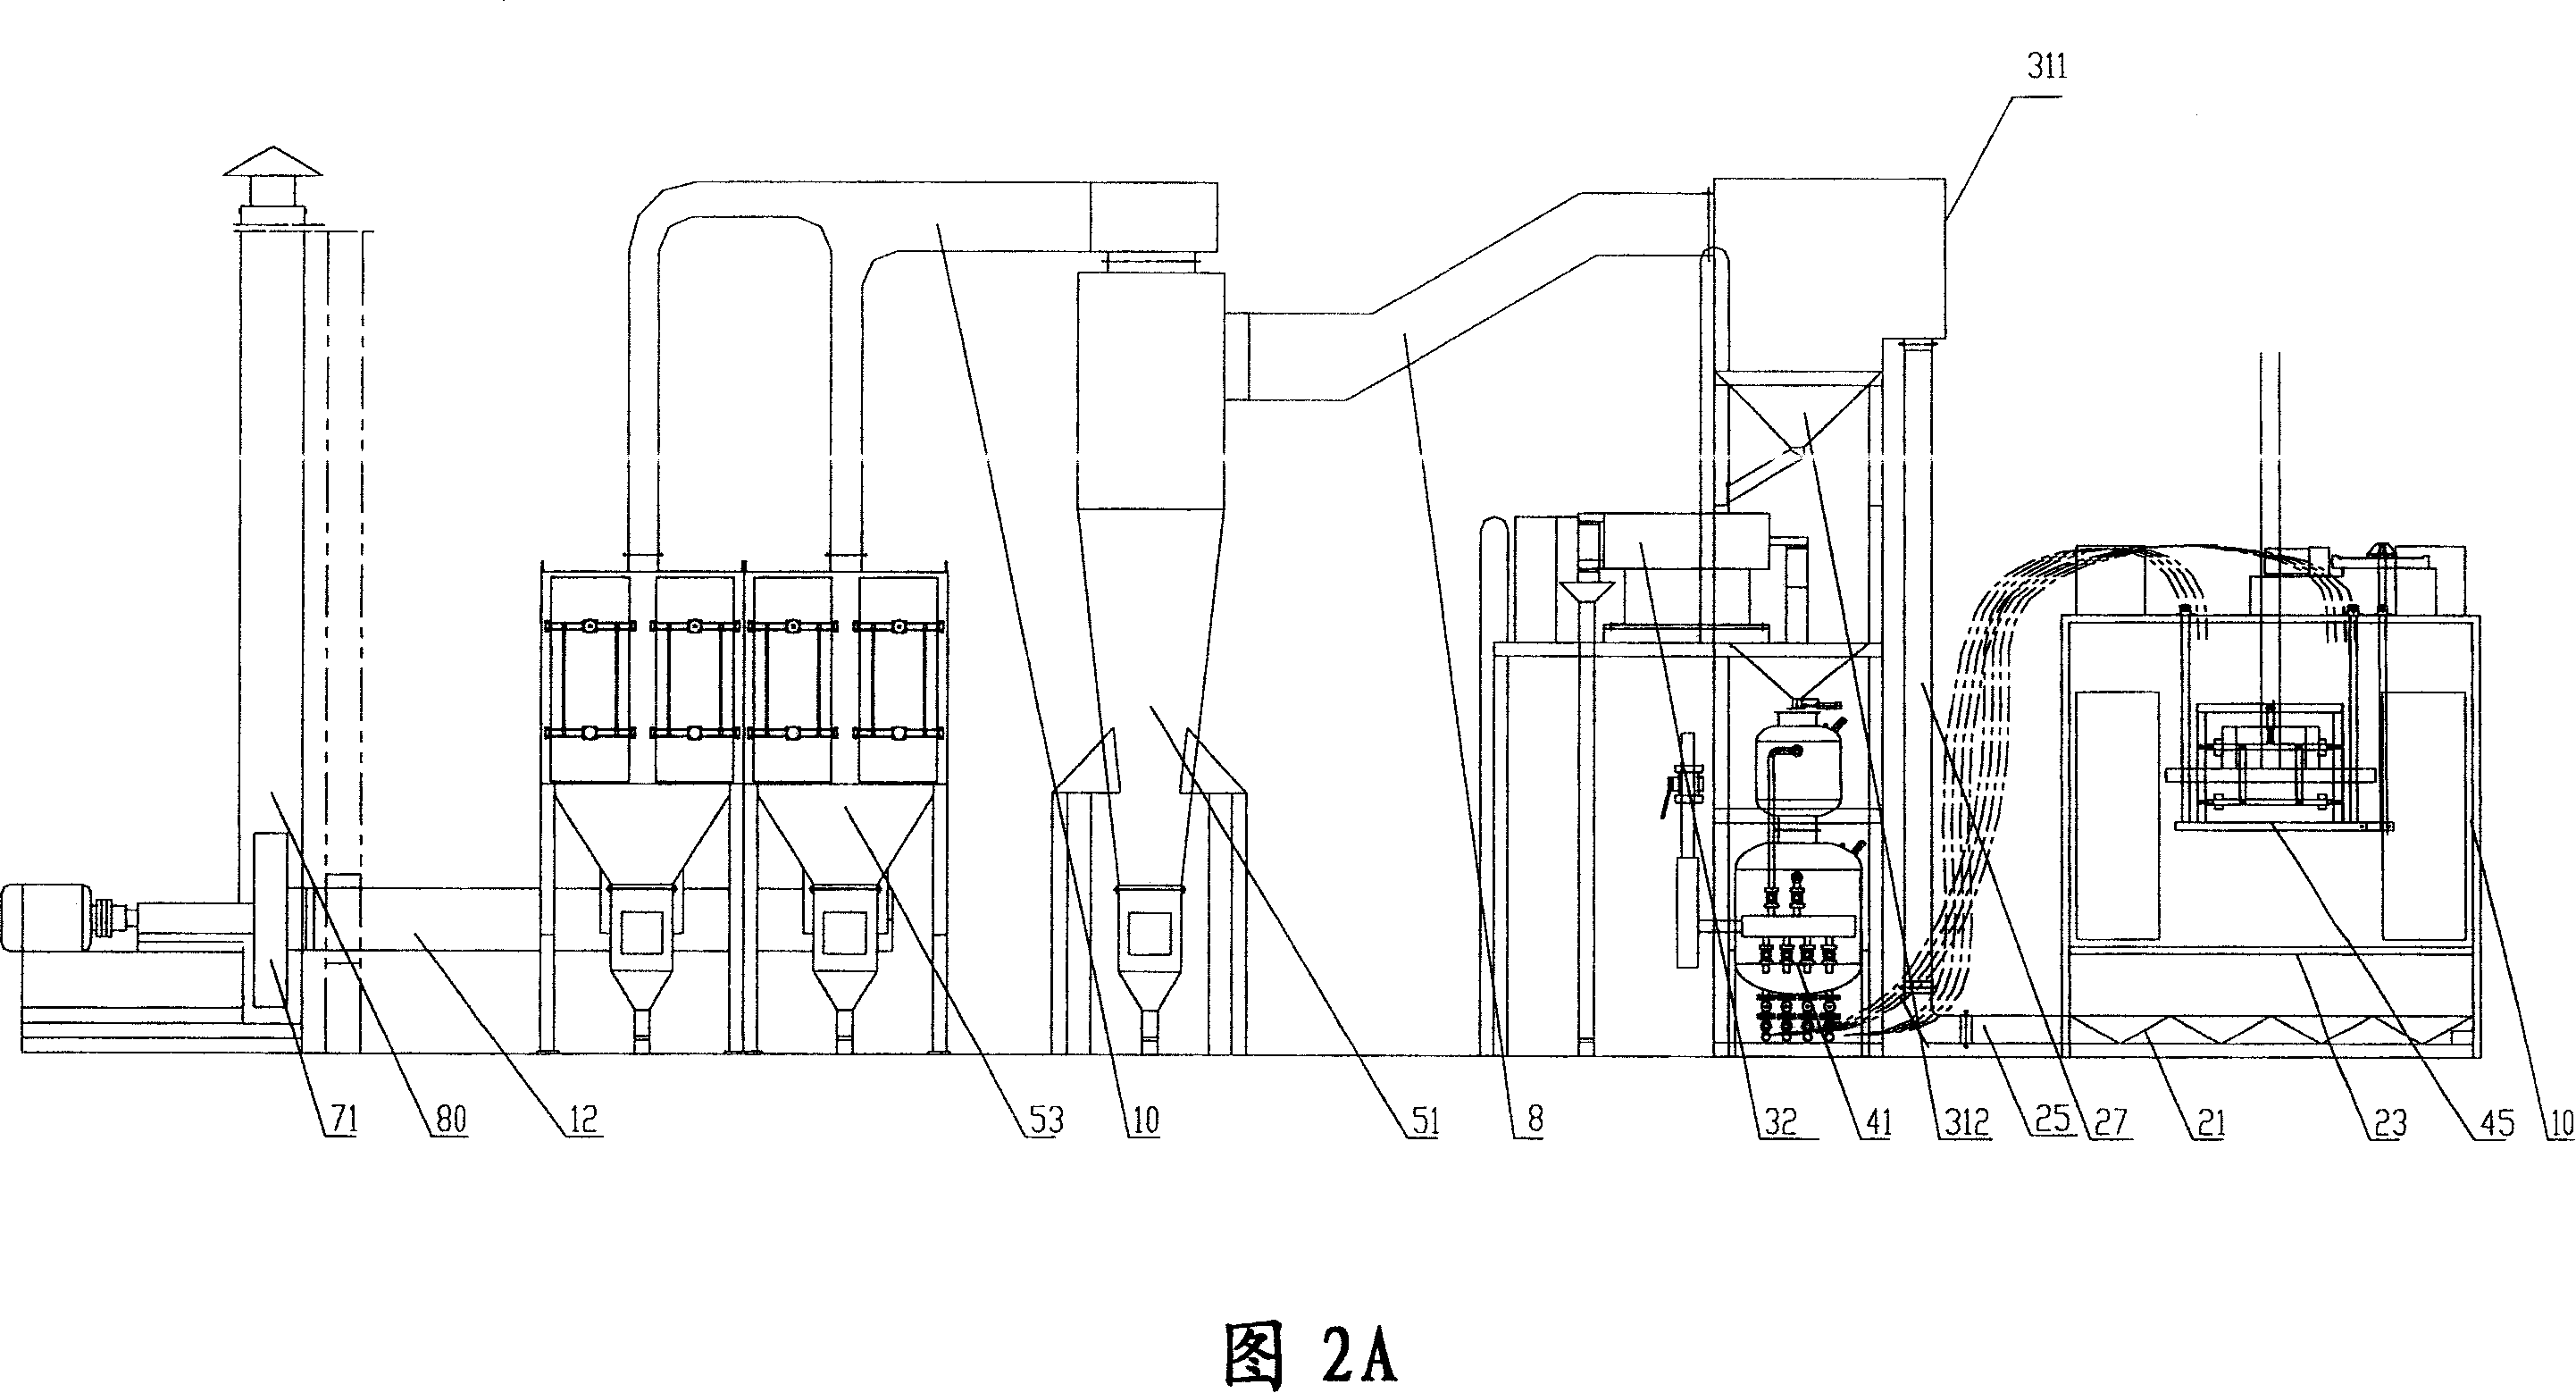 Aluminium plant electrolytic carbon residual anode surface pellet injecting and sandblast cleaning system and method